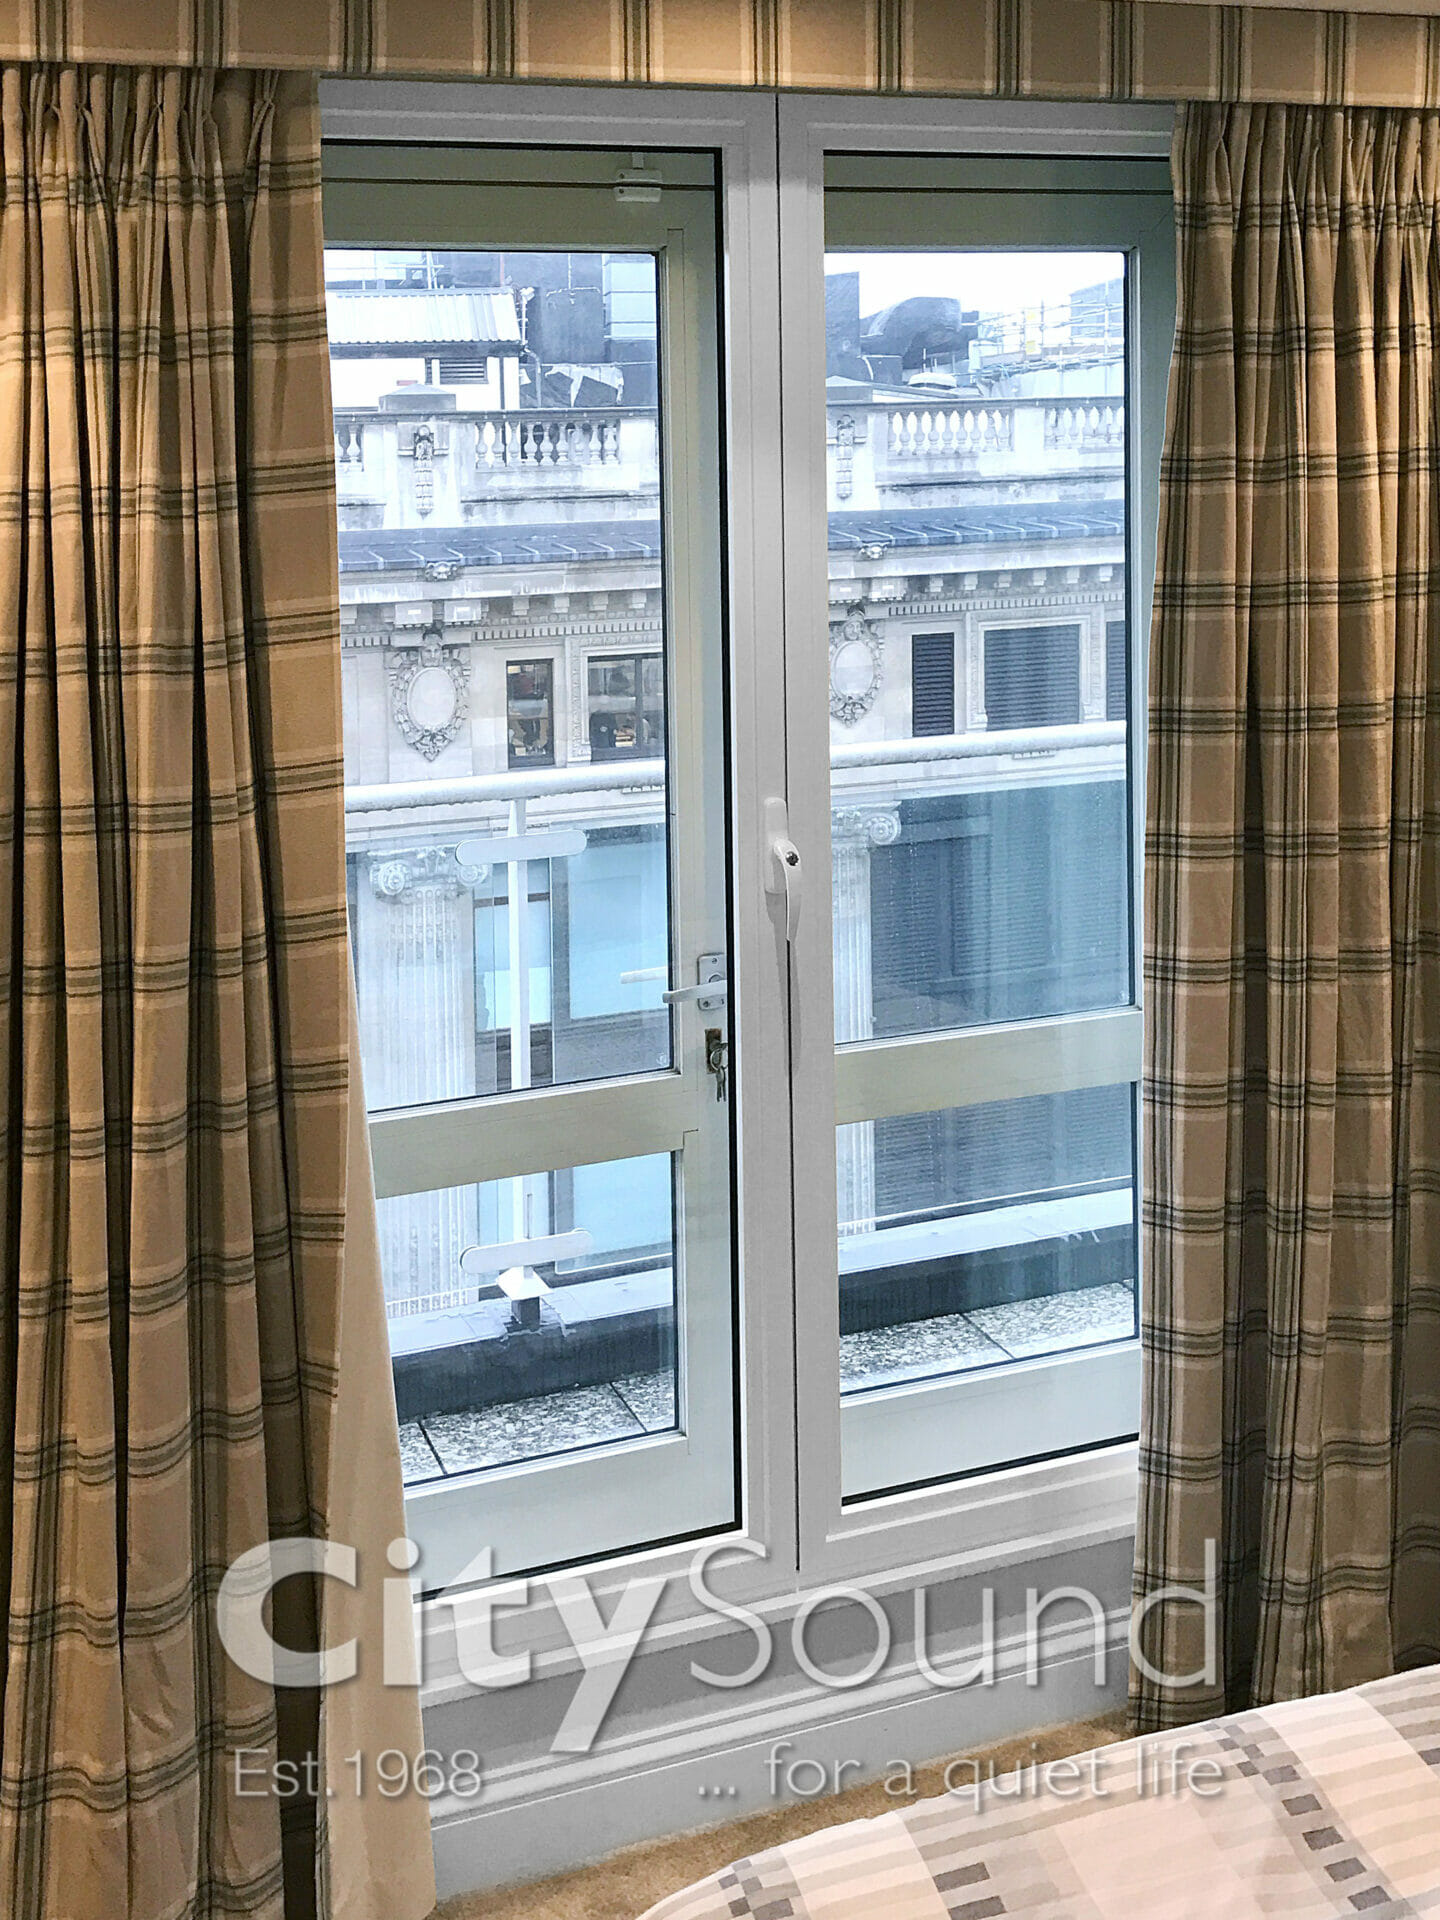 02. Commercial secondary glazing (Double doors) fitted. Glazed with thick acoustic glass for noise reduction (Knightbridge, London)